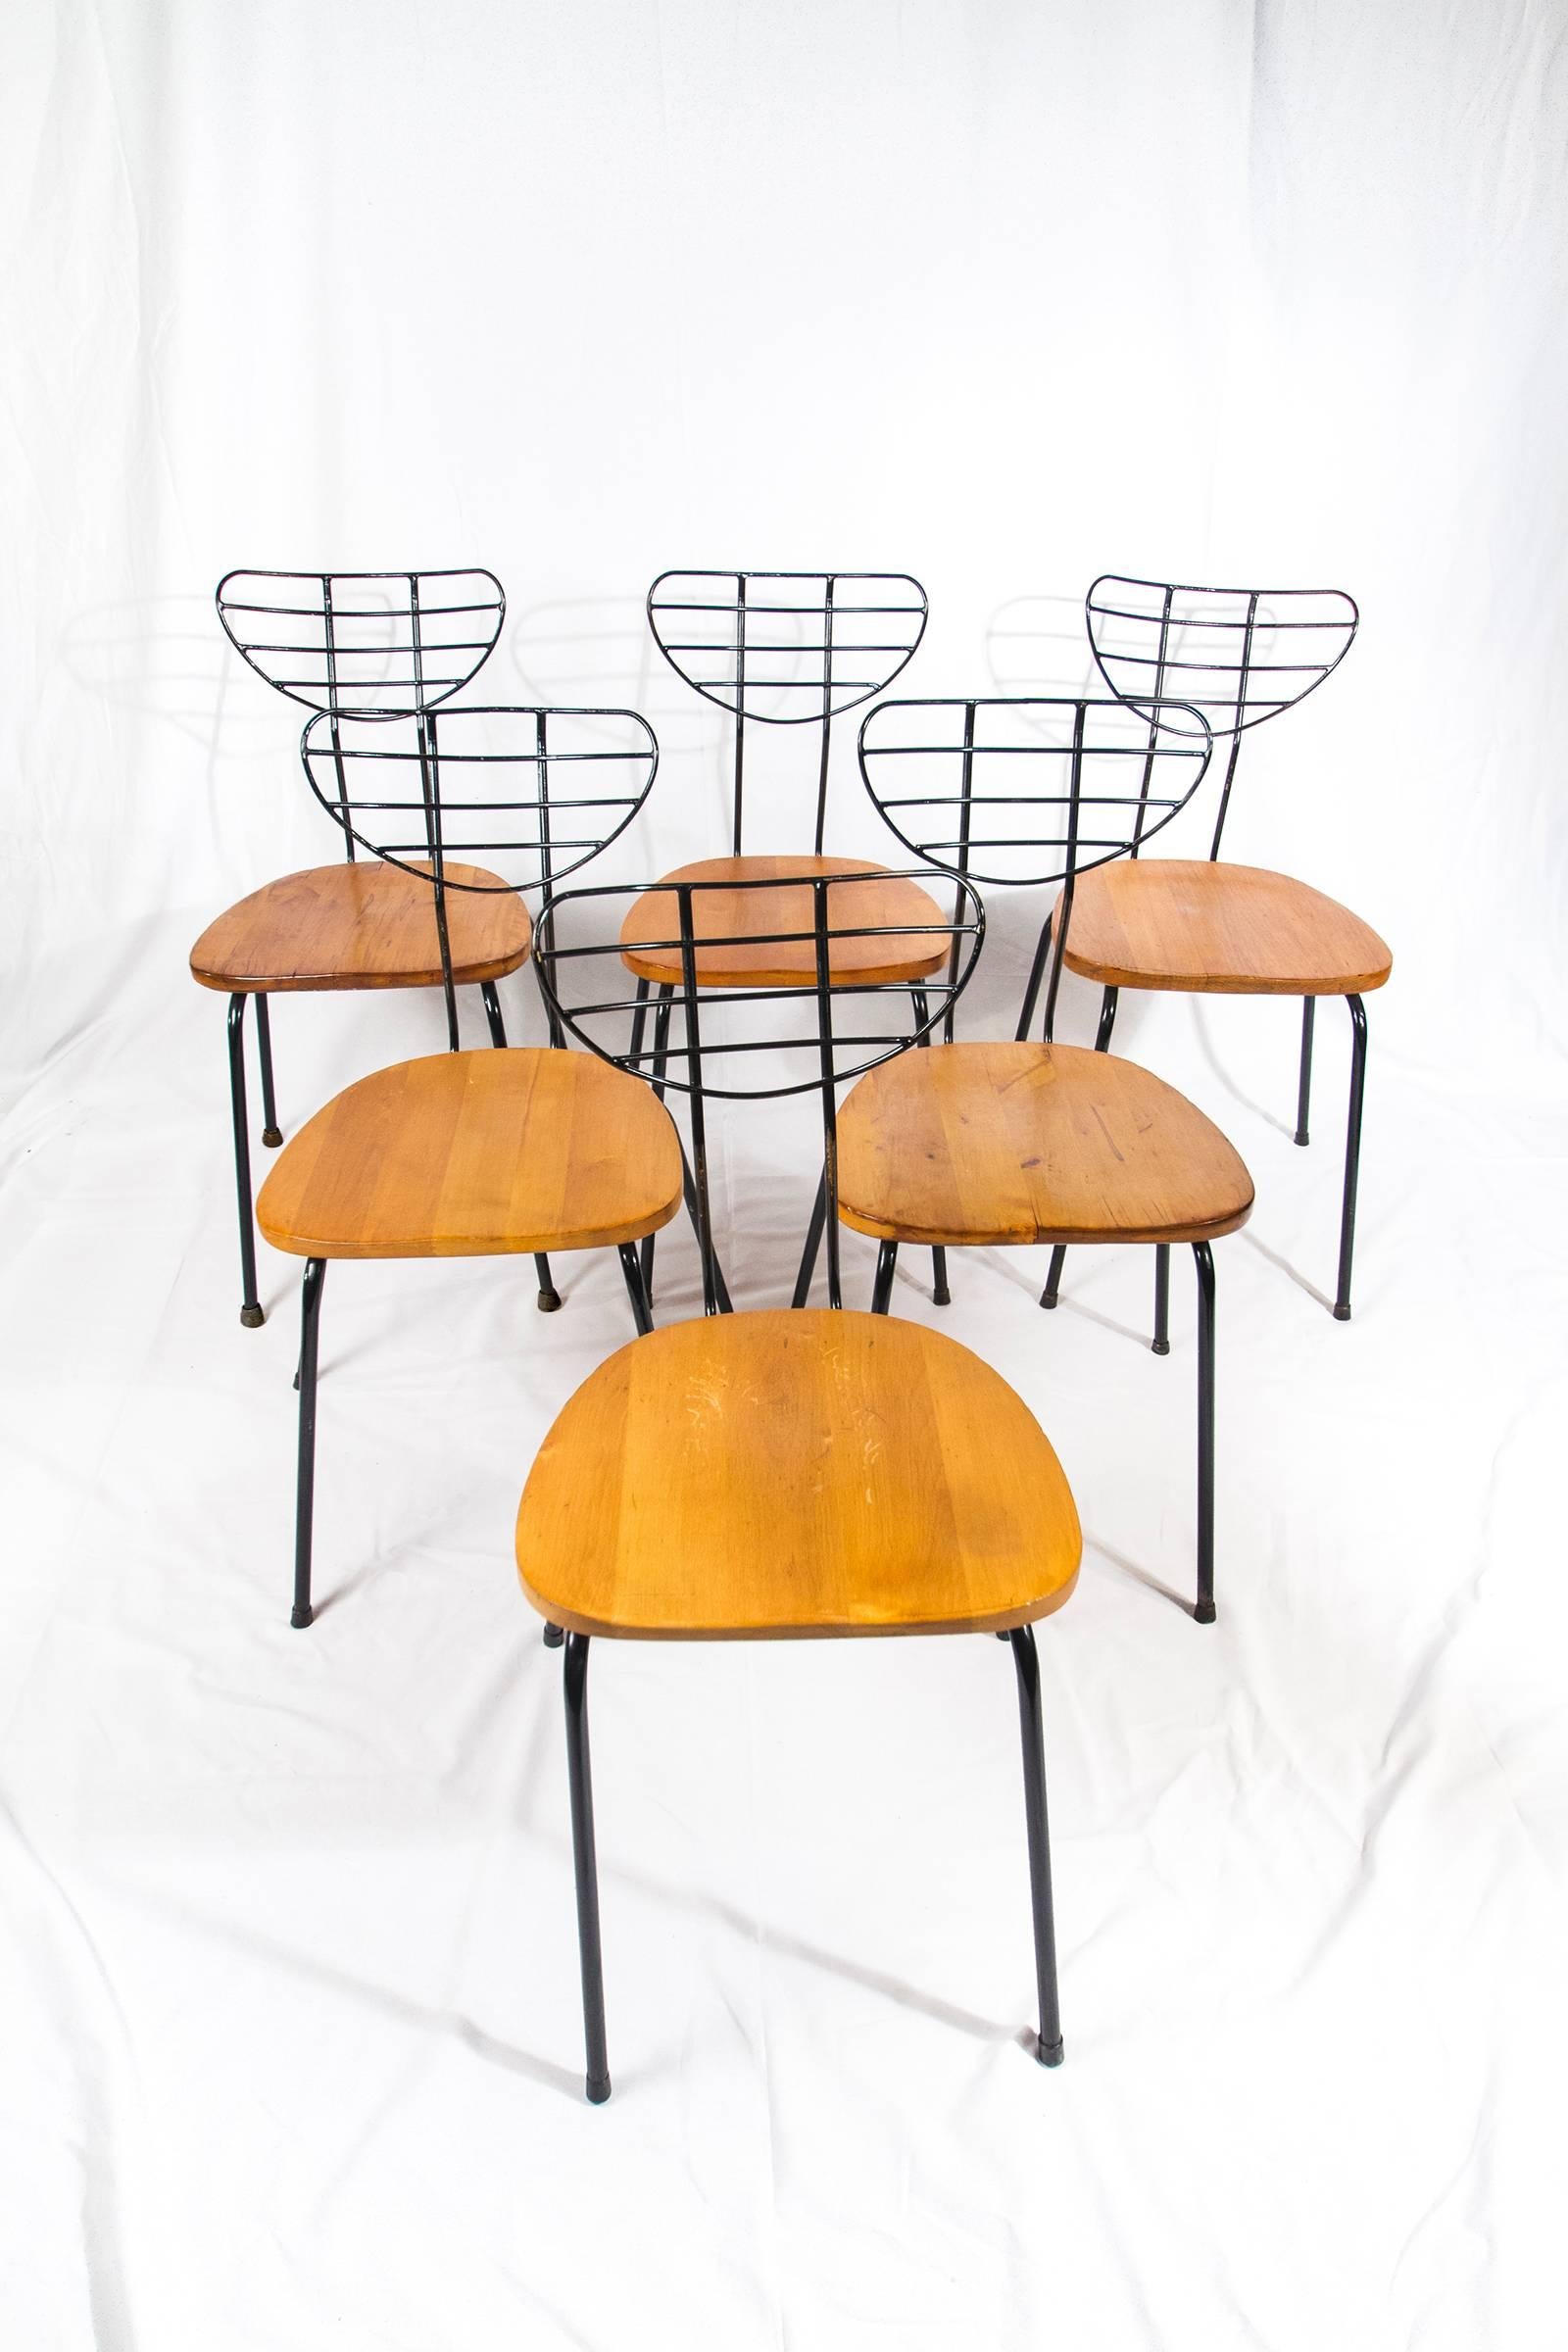 Set of six radar chairs by the Belgium designer Willy Van Der Meeren for Tubax, Belgium, 1950s.

Chairs made of a black painted metal structure with oiled wooden seats. The legs have black rubber receptions. 

Made circa 1955. 

The chairs are